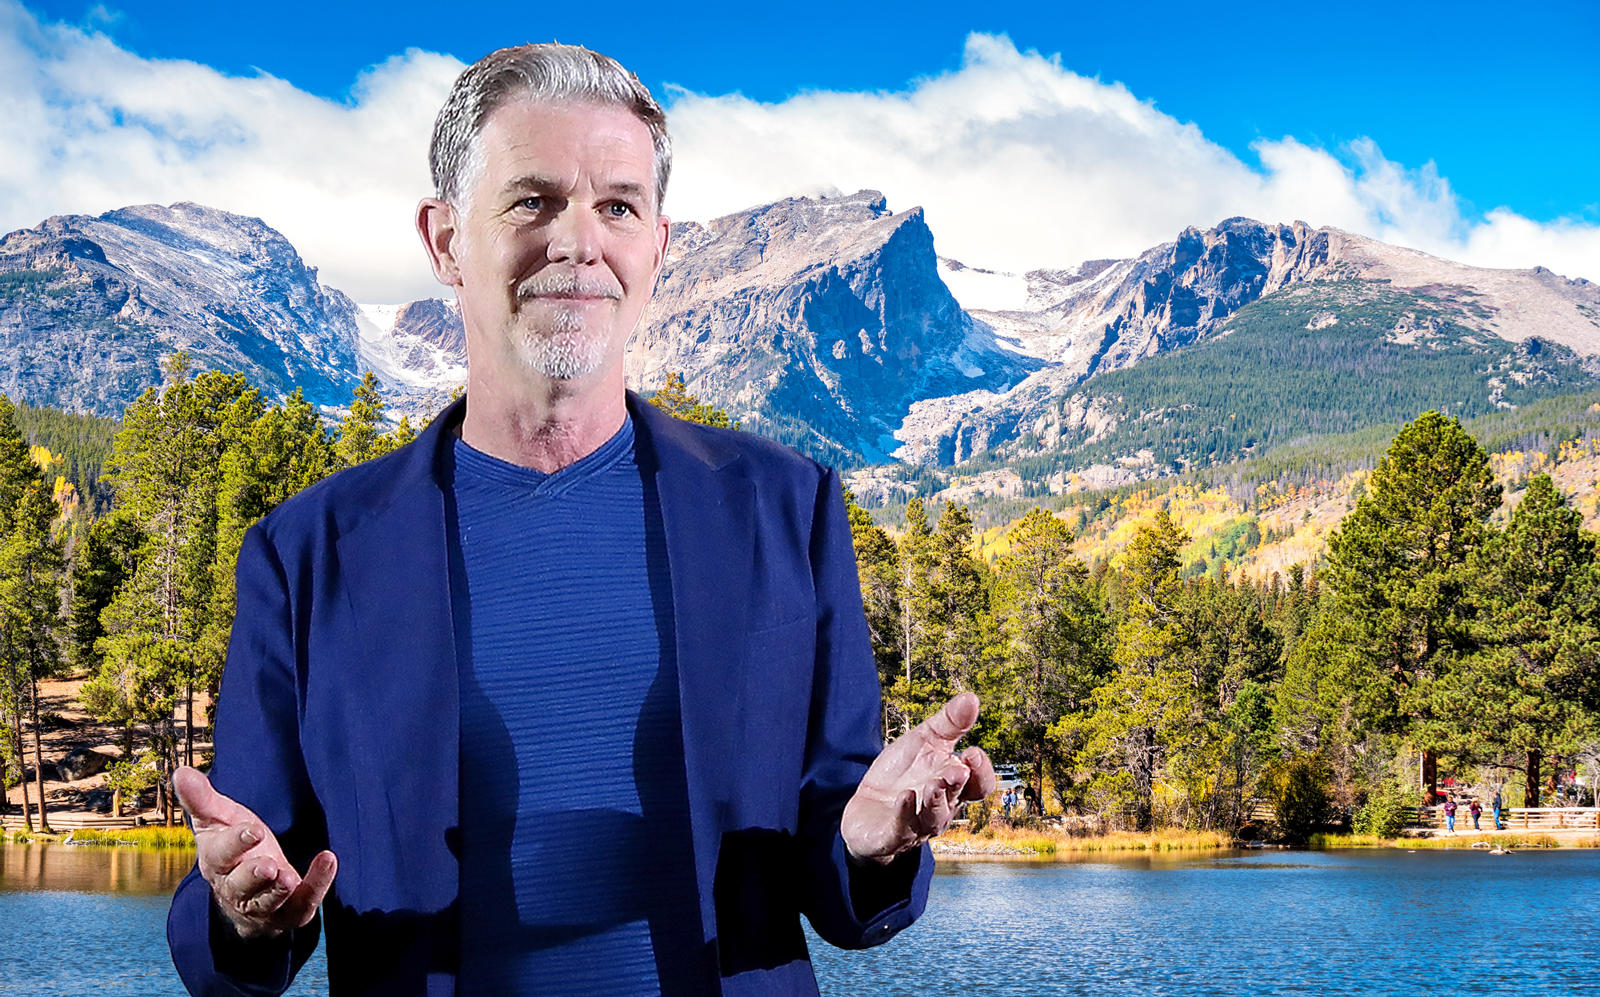 Netflix founder Reed Hastings (iStock, Getty)